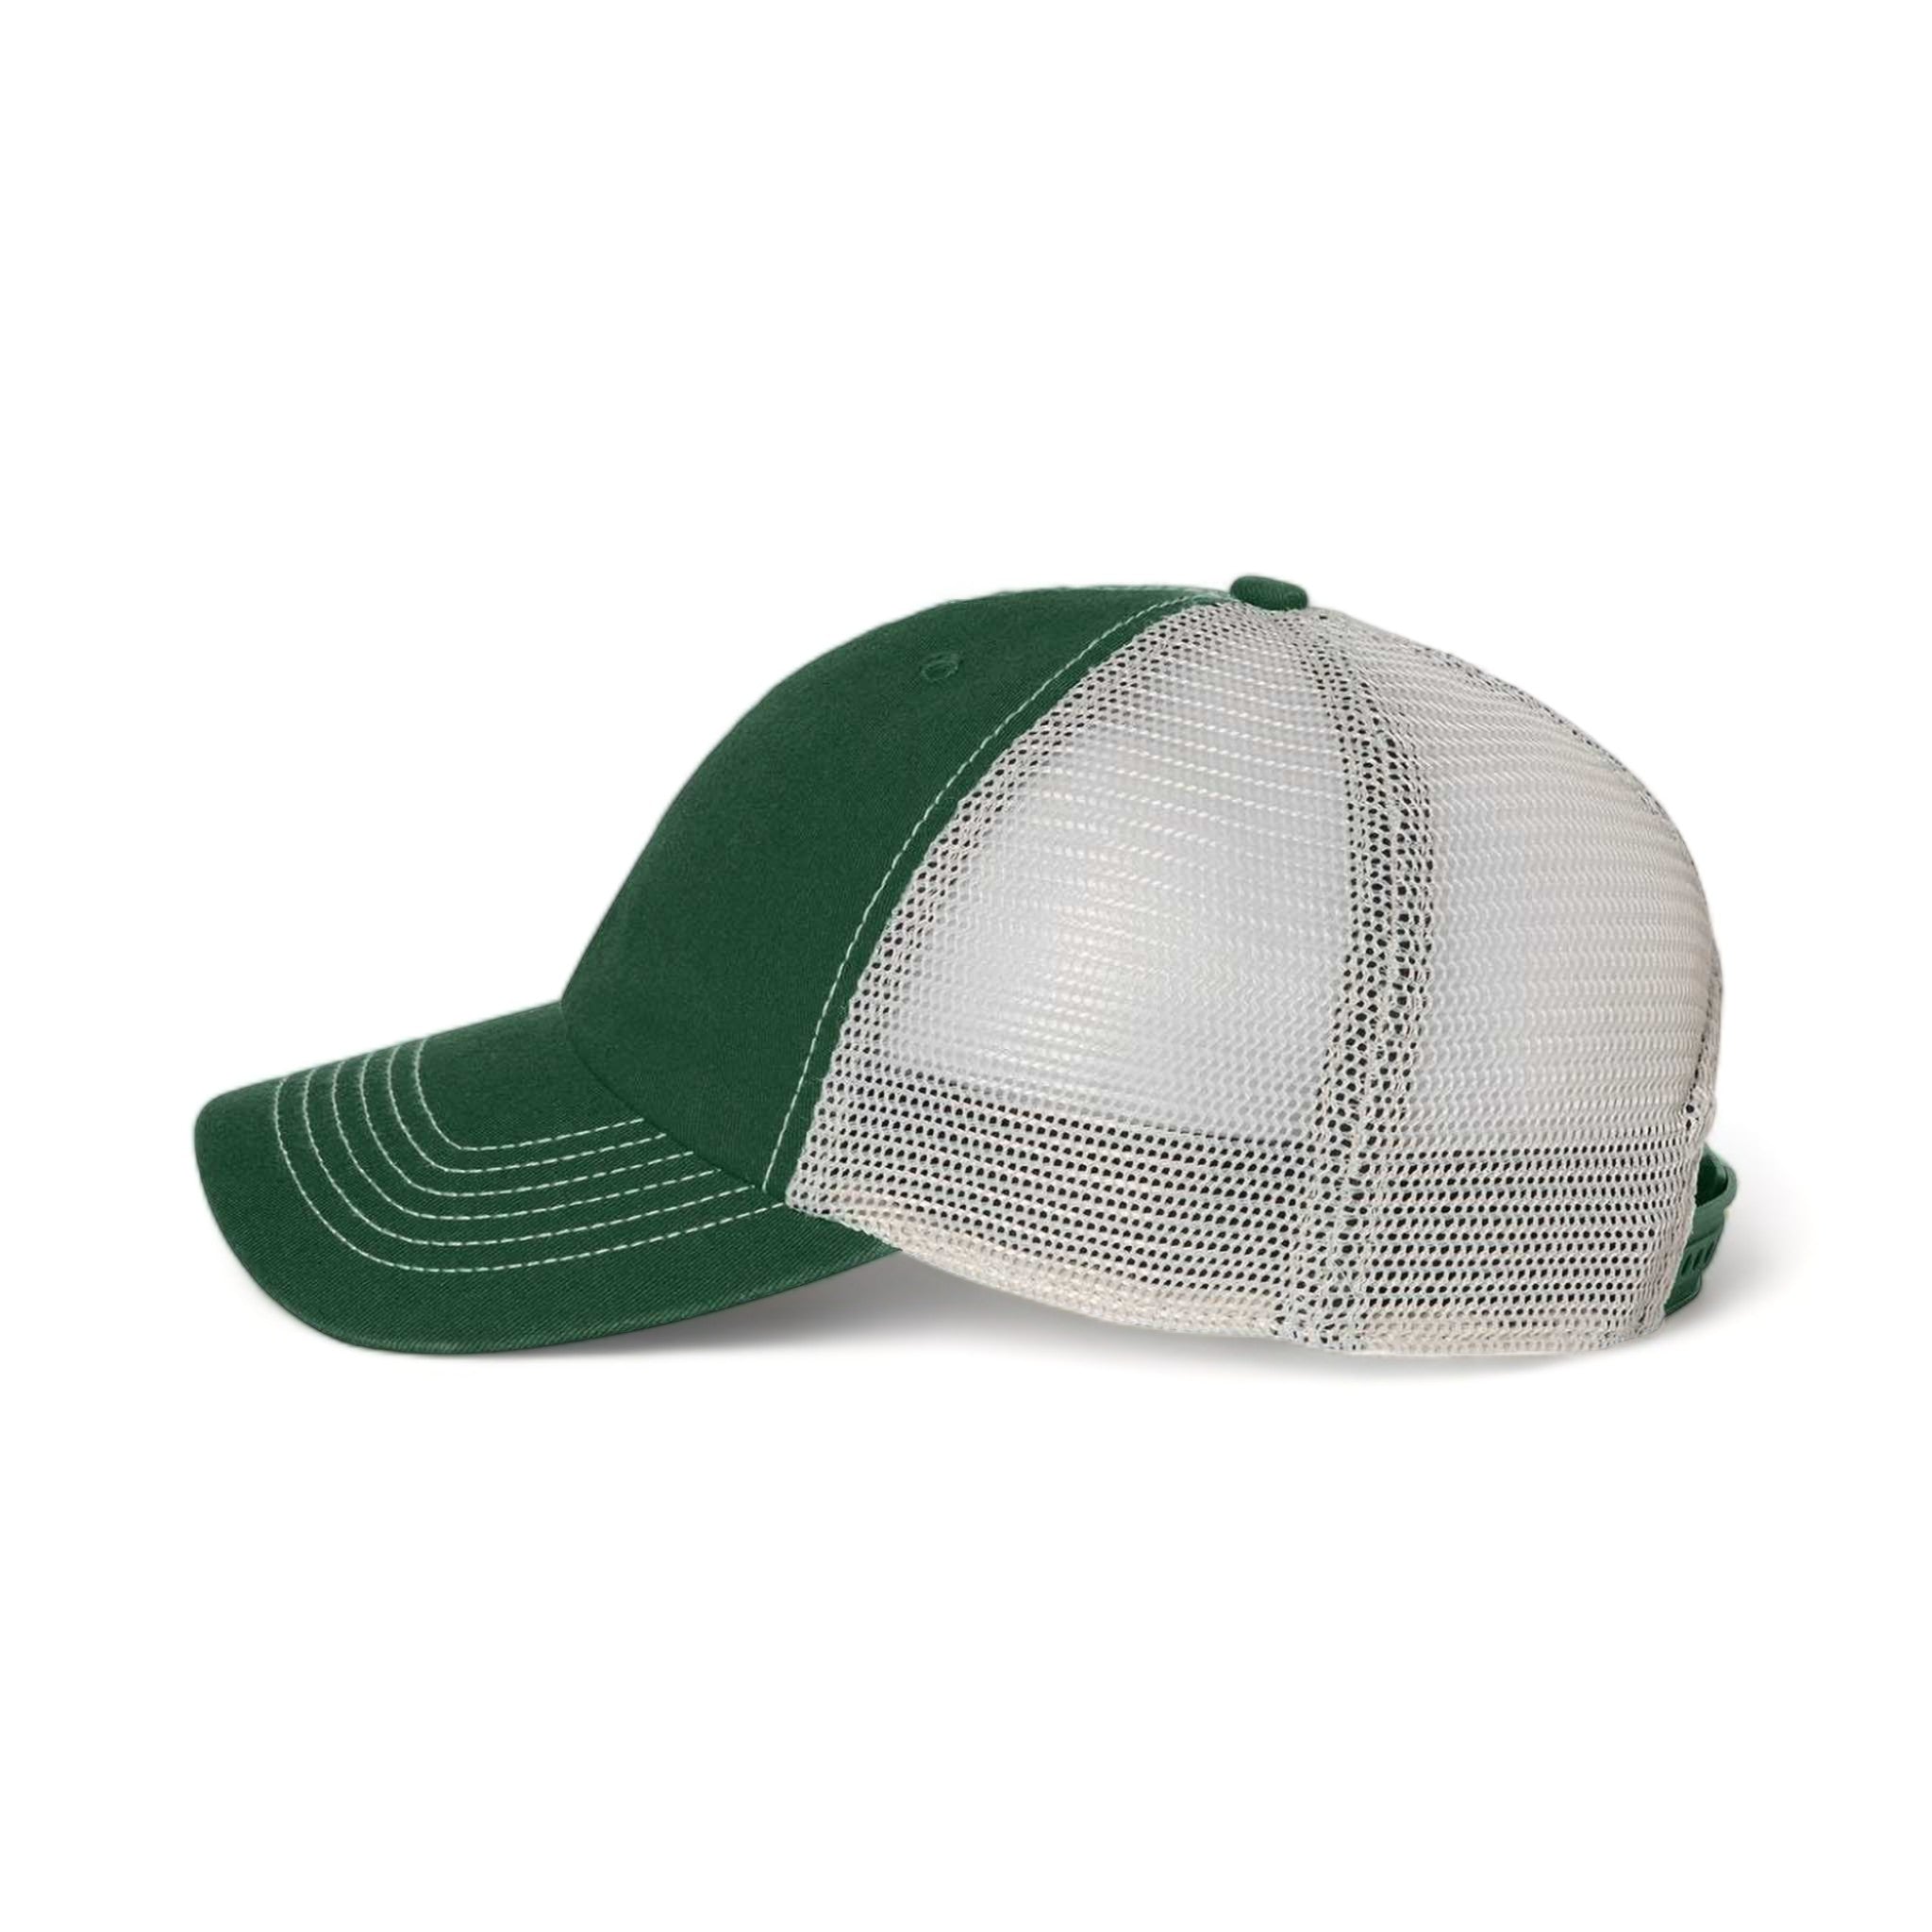 Side view of 47 Brand 4710 custom hat in dark green and stone